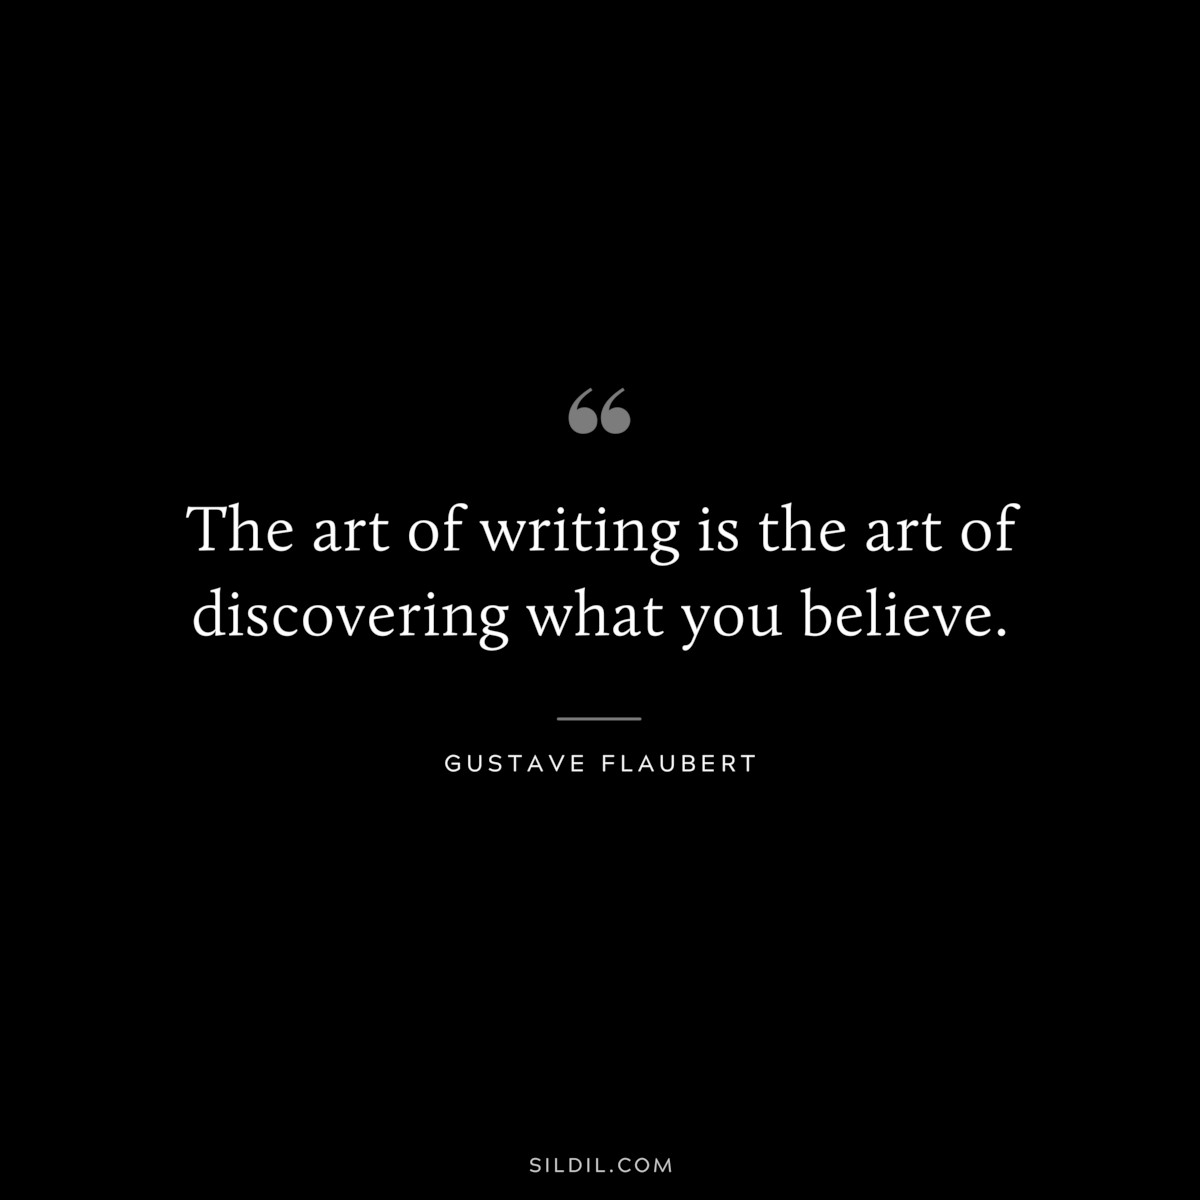 The art of writing is the art of discovering what you believe. ― Gustave Flaubert